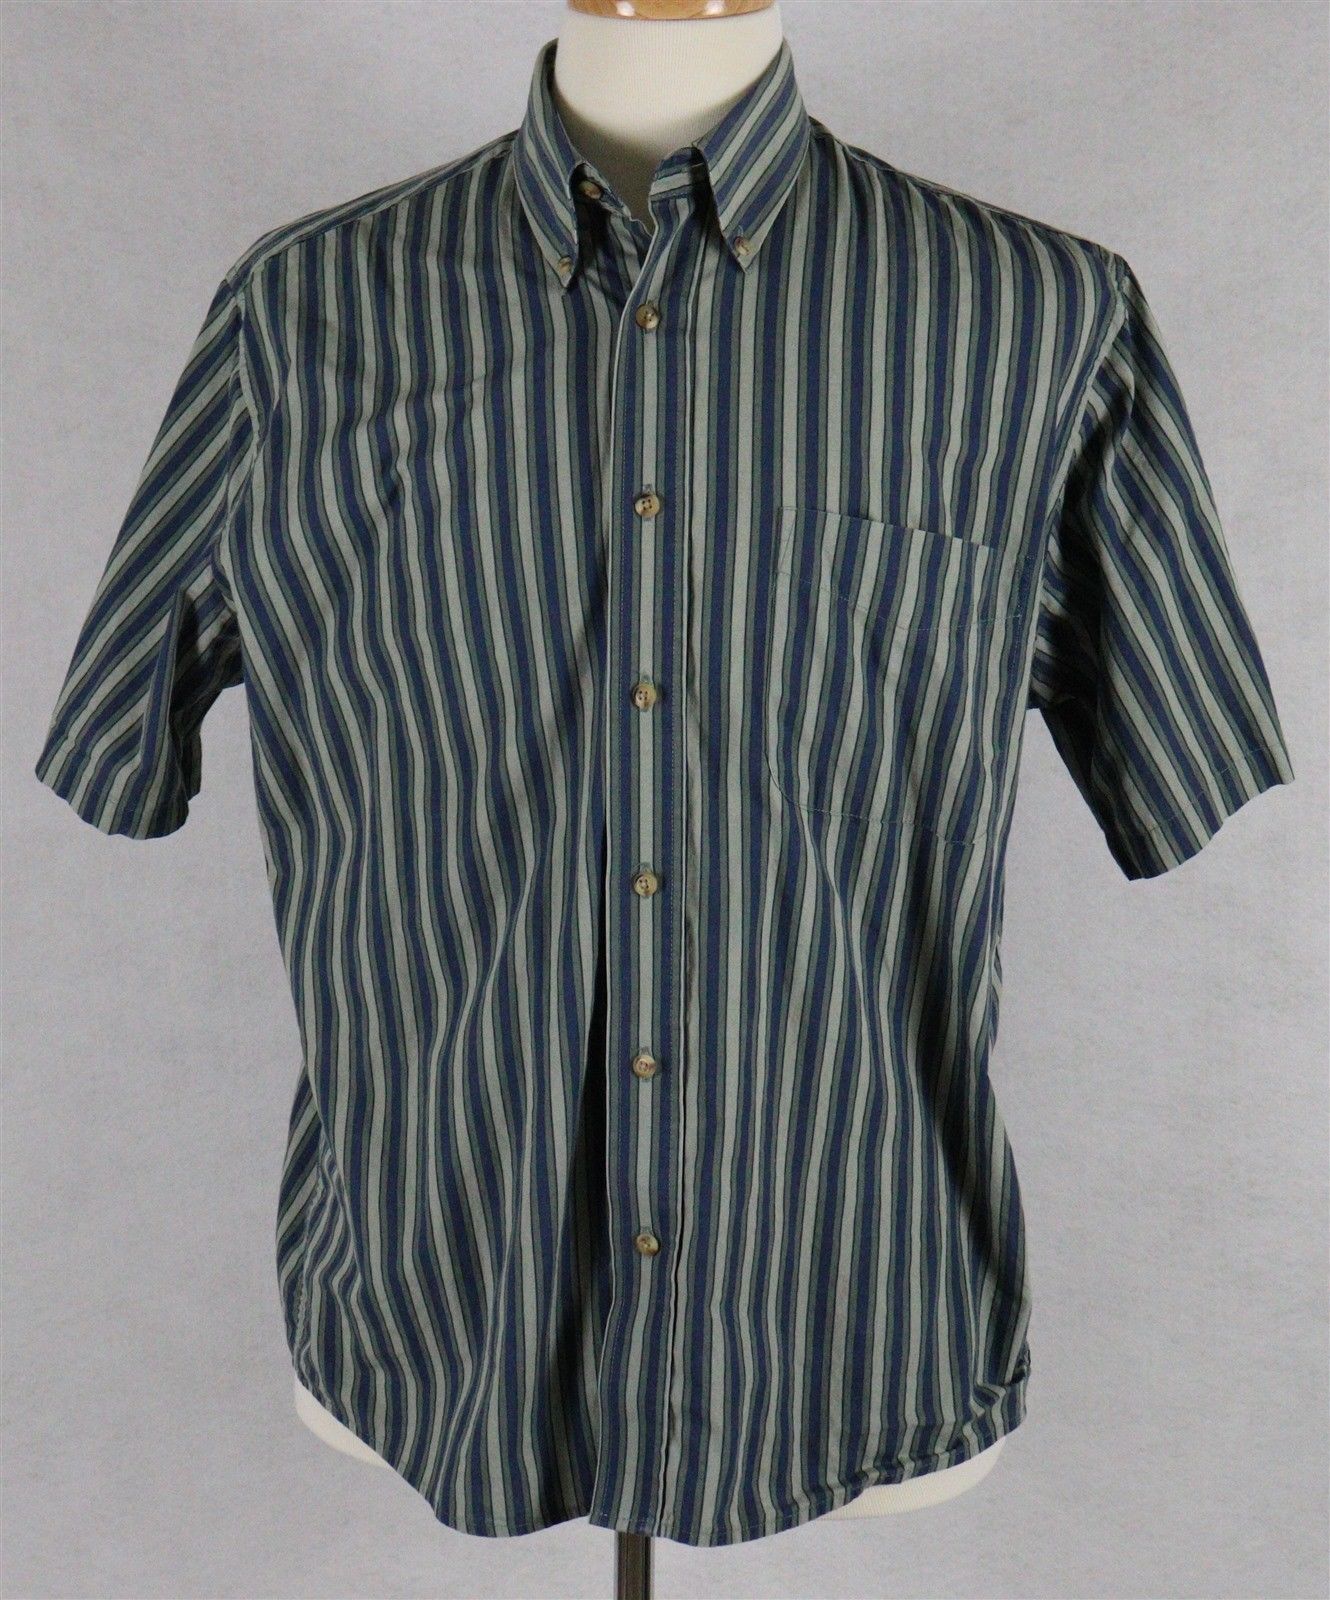 Natural Issue Mens Wrinkle Free Short Sleeve Striped Green Shirt Size ...